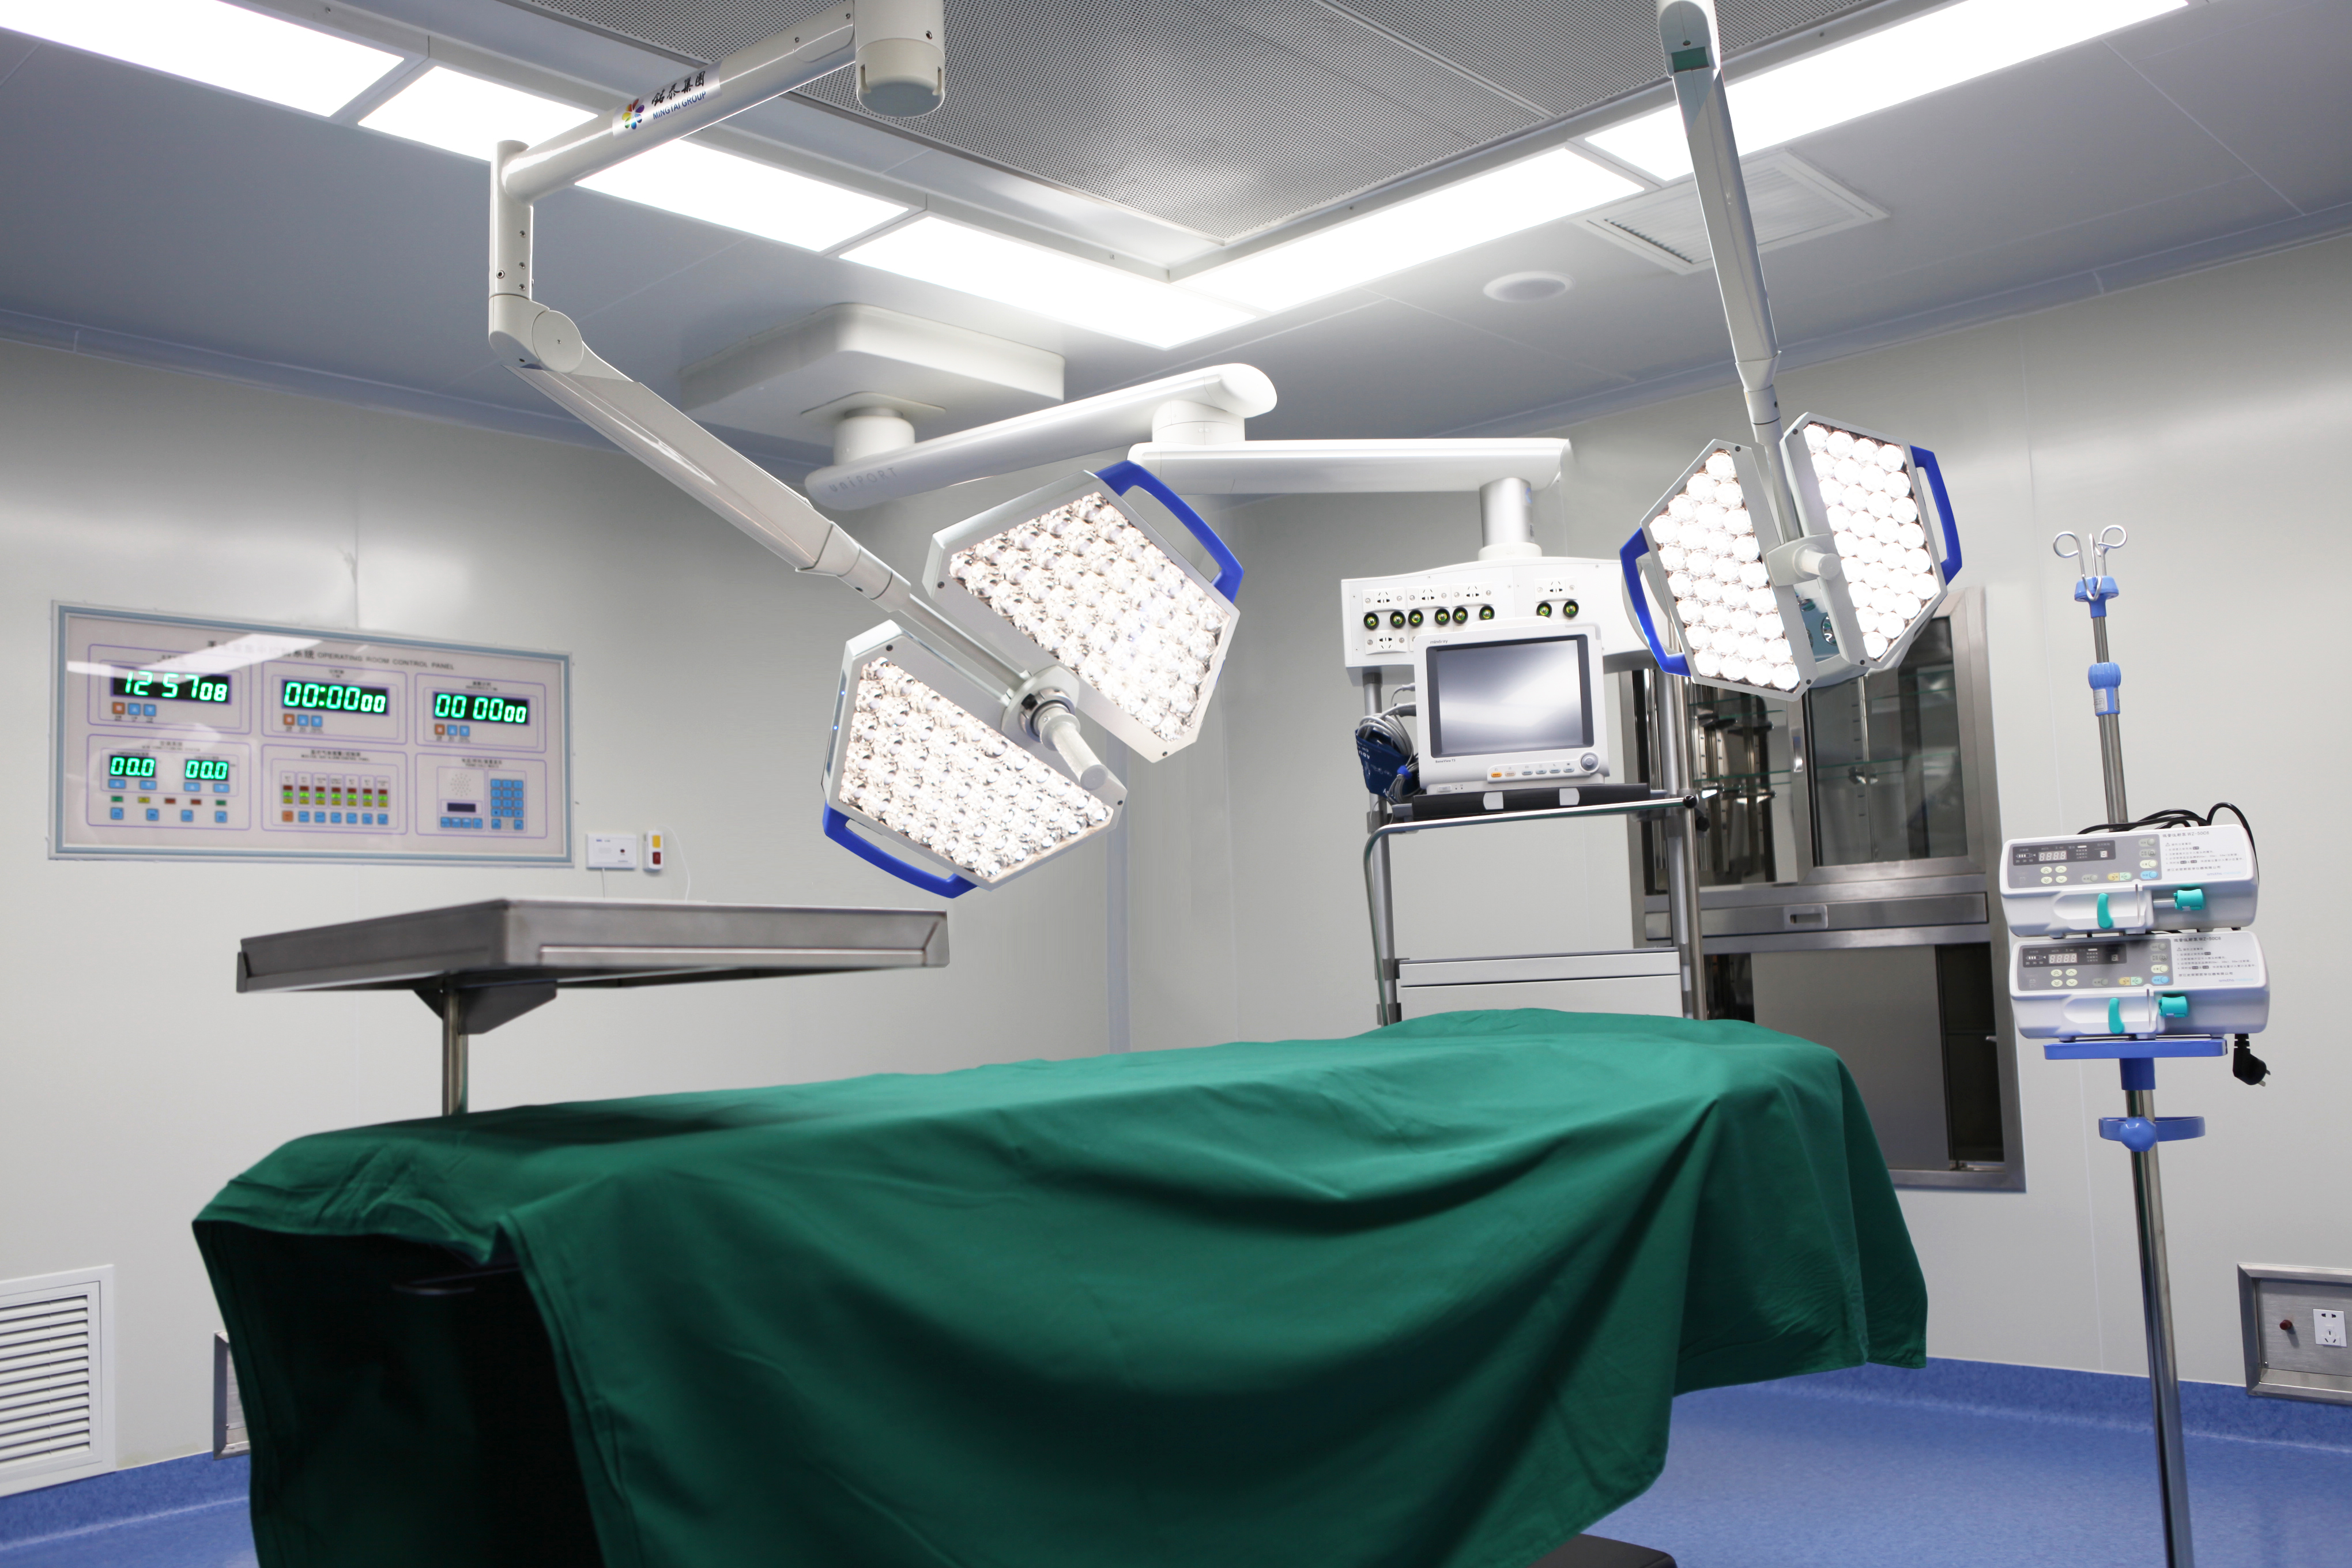 LED shadowless lamp for use in operating room